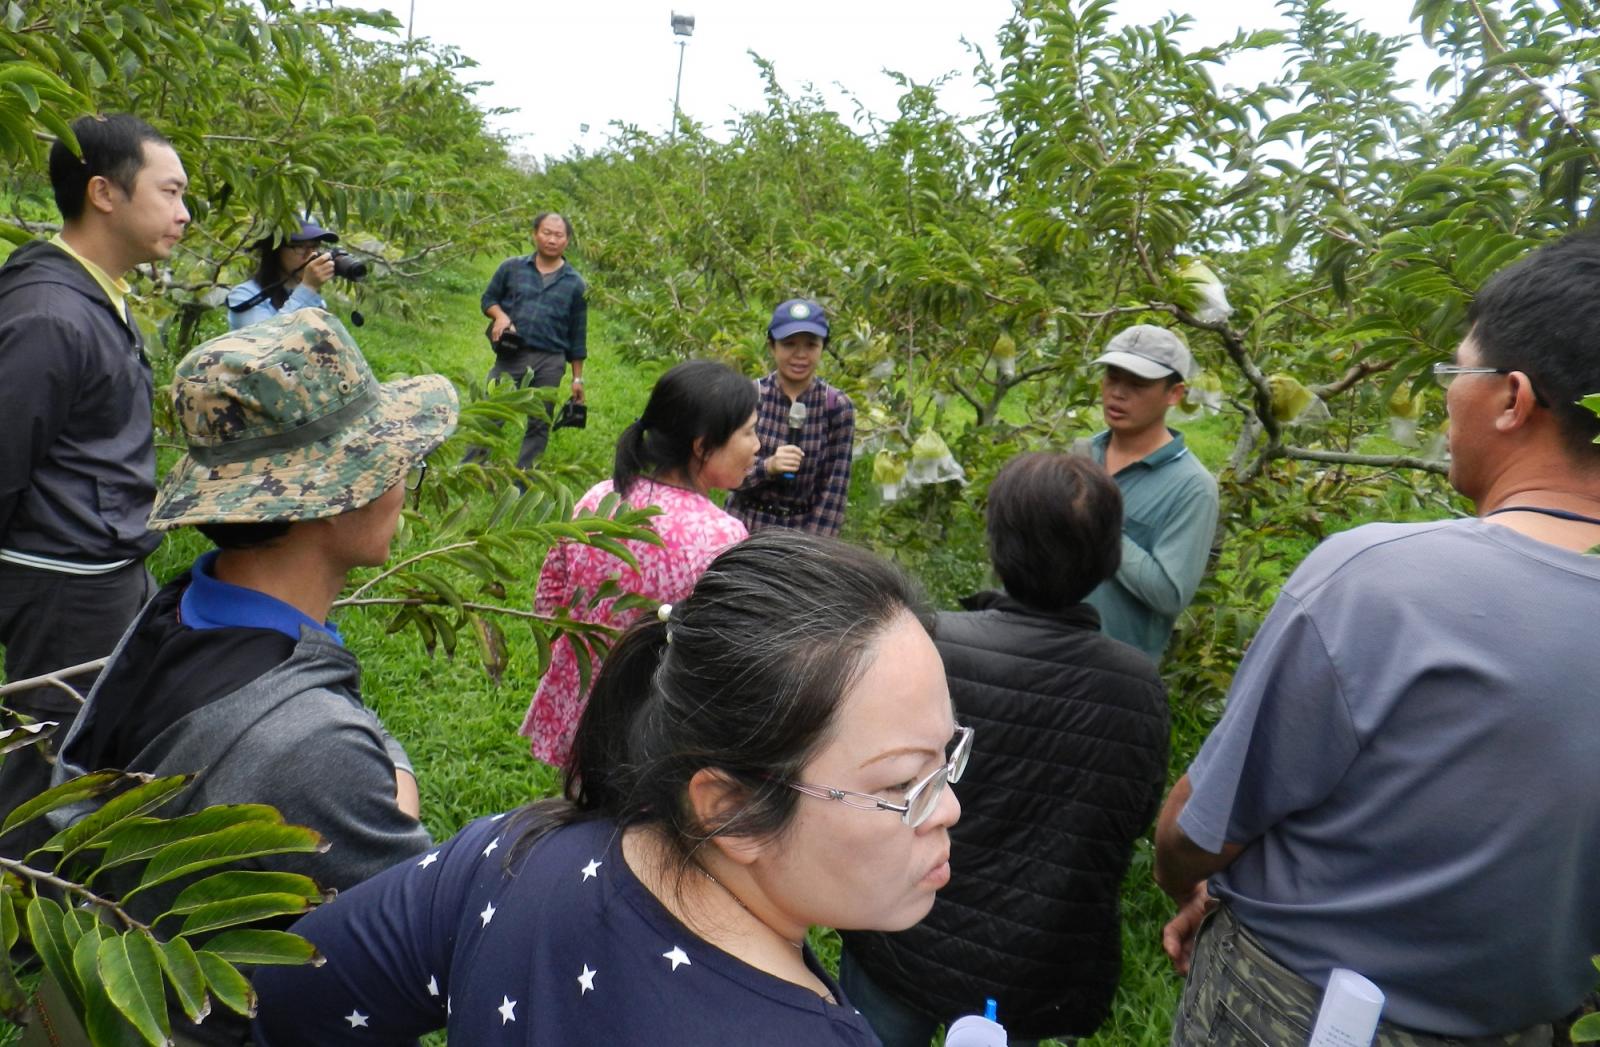 Growers attending the event look at sugar apple trees on site.